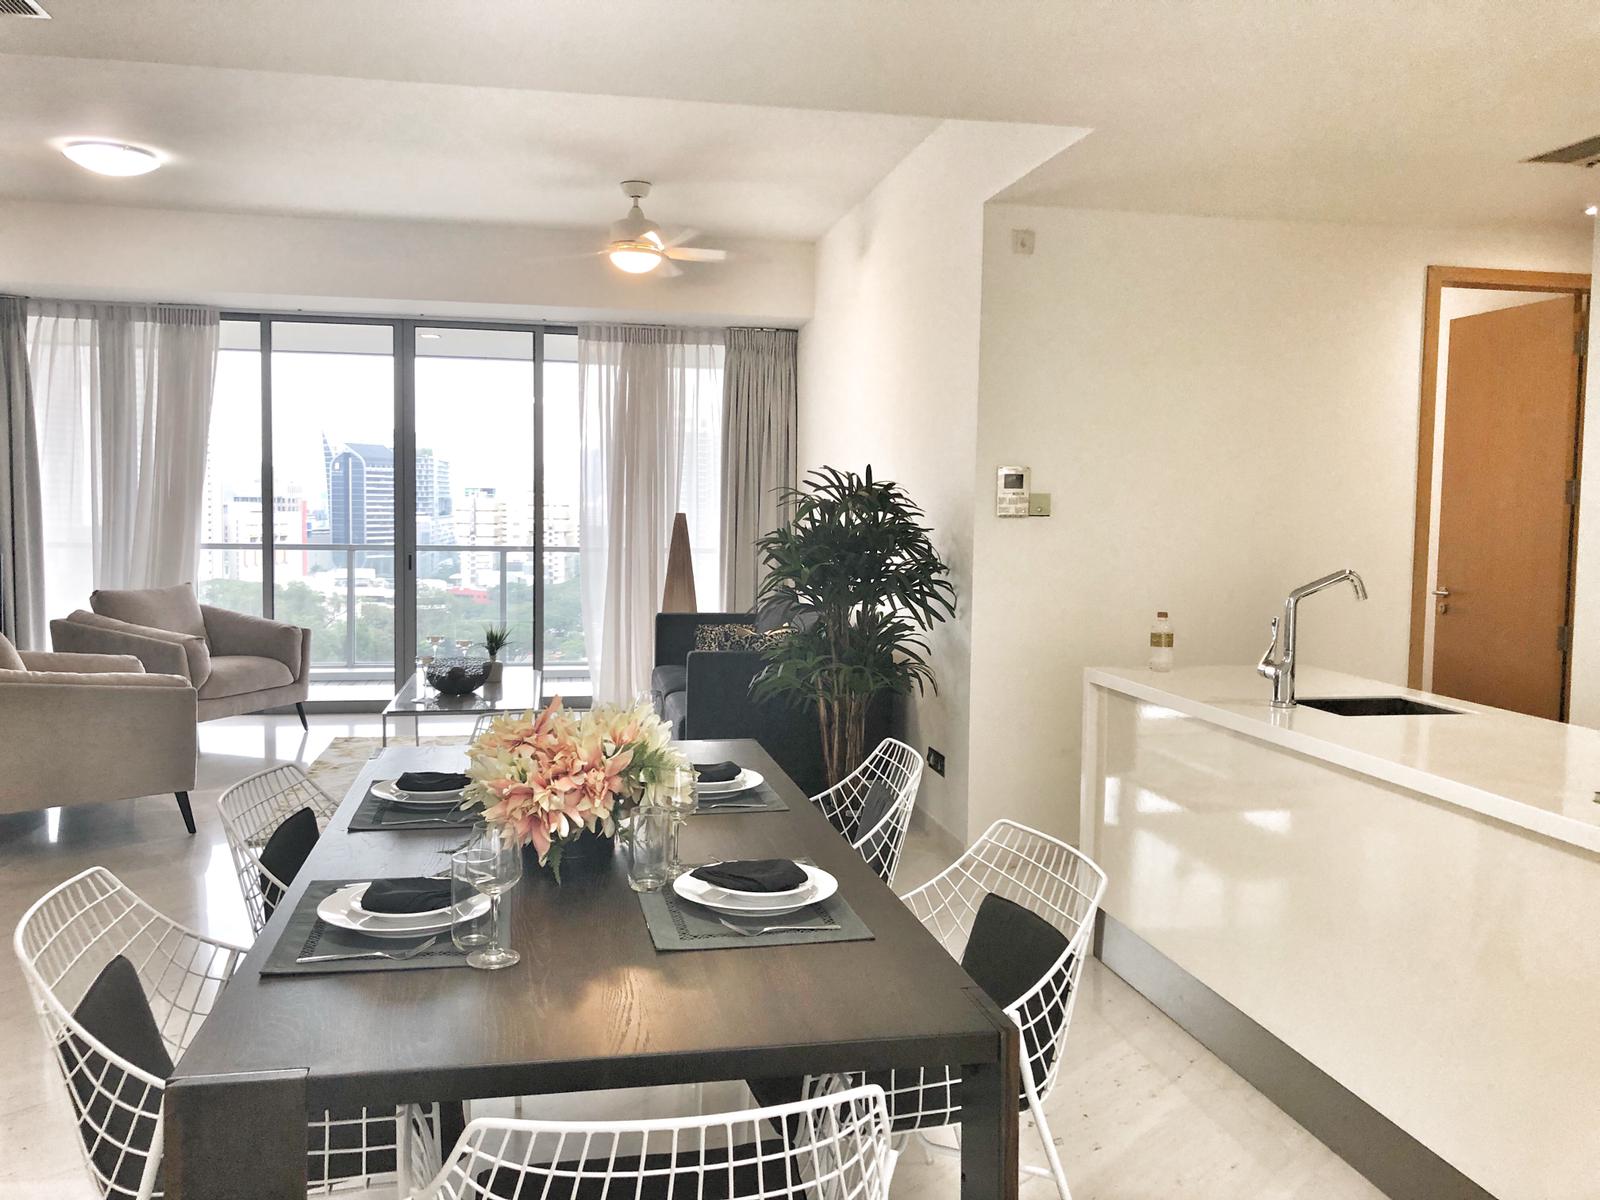 [SOLD] Paterson Suites - 4 Bedroom